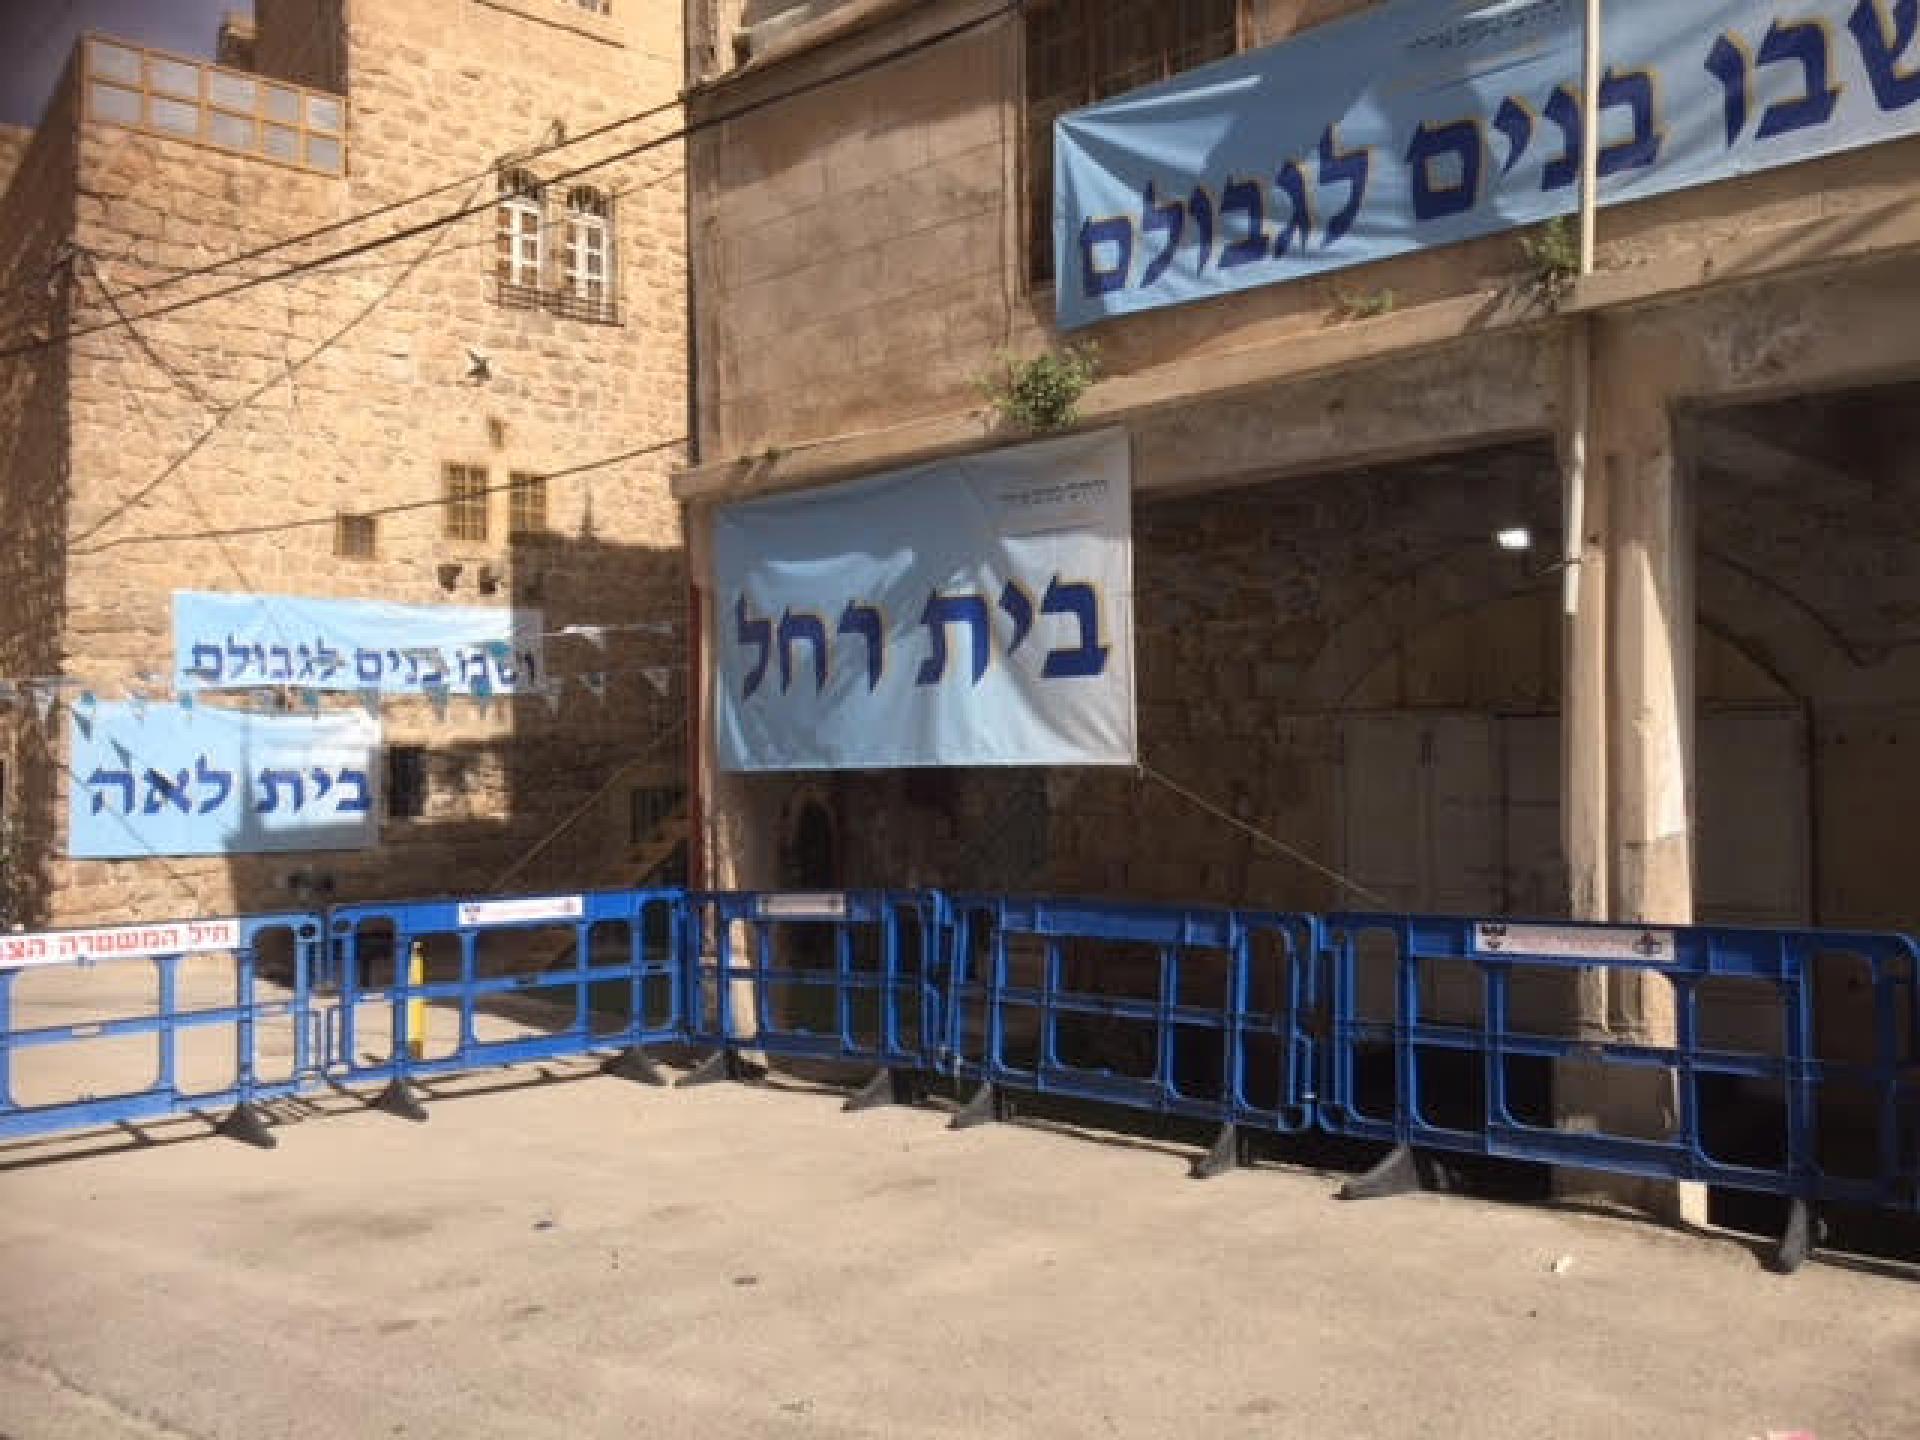 The police barriers protect  the settlers